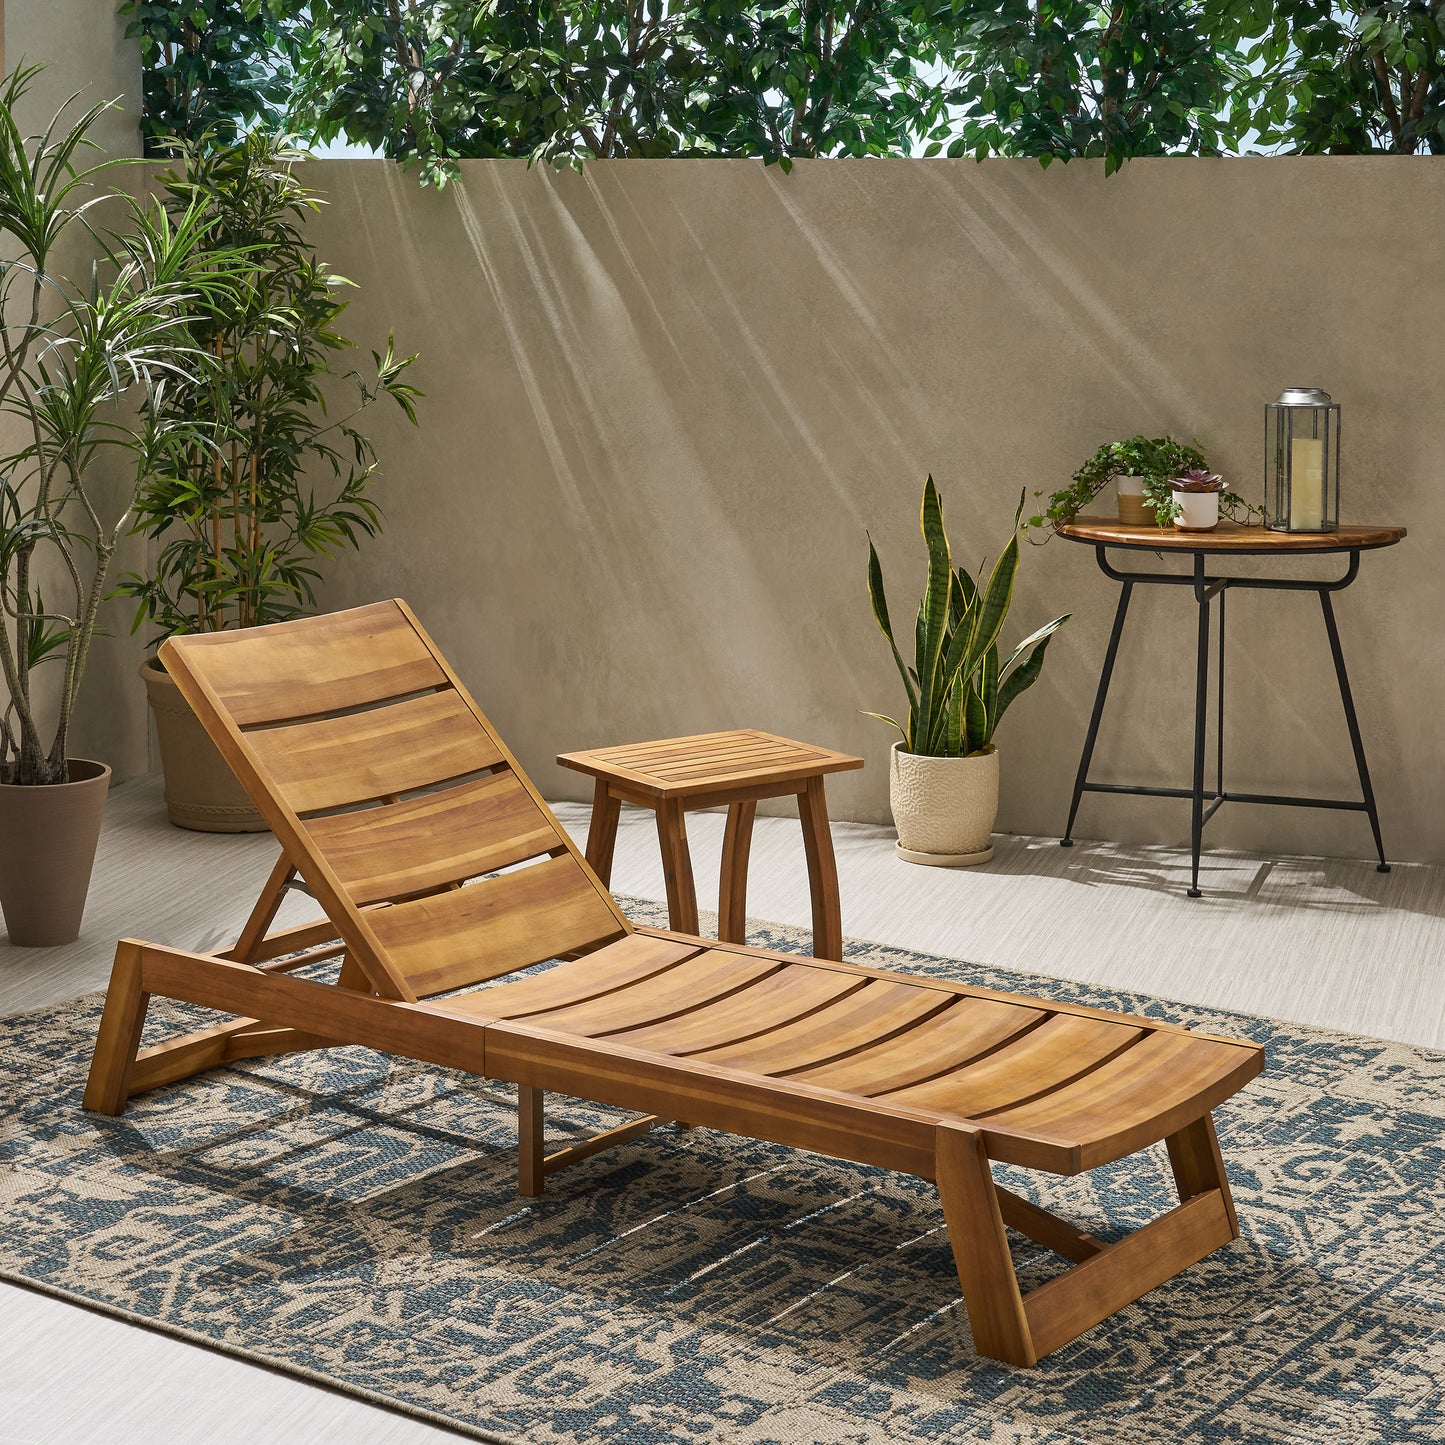 Emileigh Outdoor Acacia Wood Chaise 2 Piece Lounge